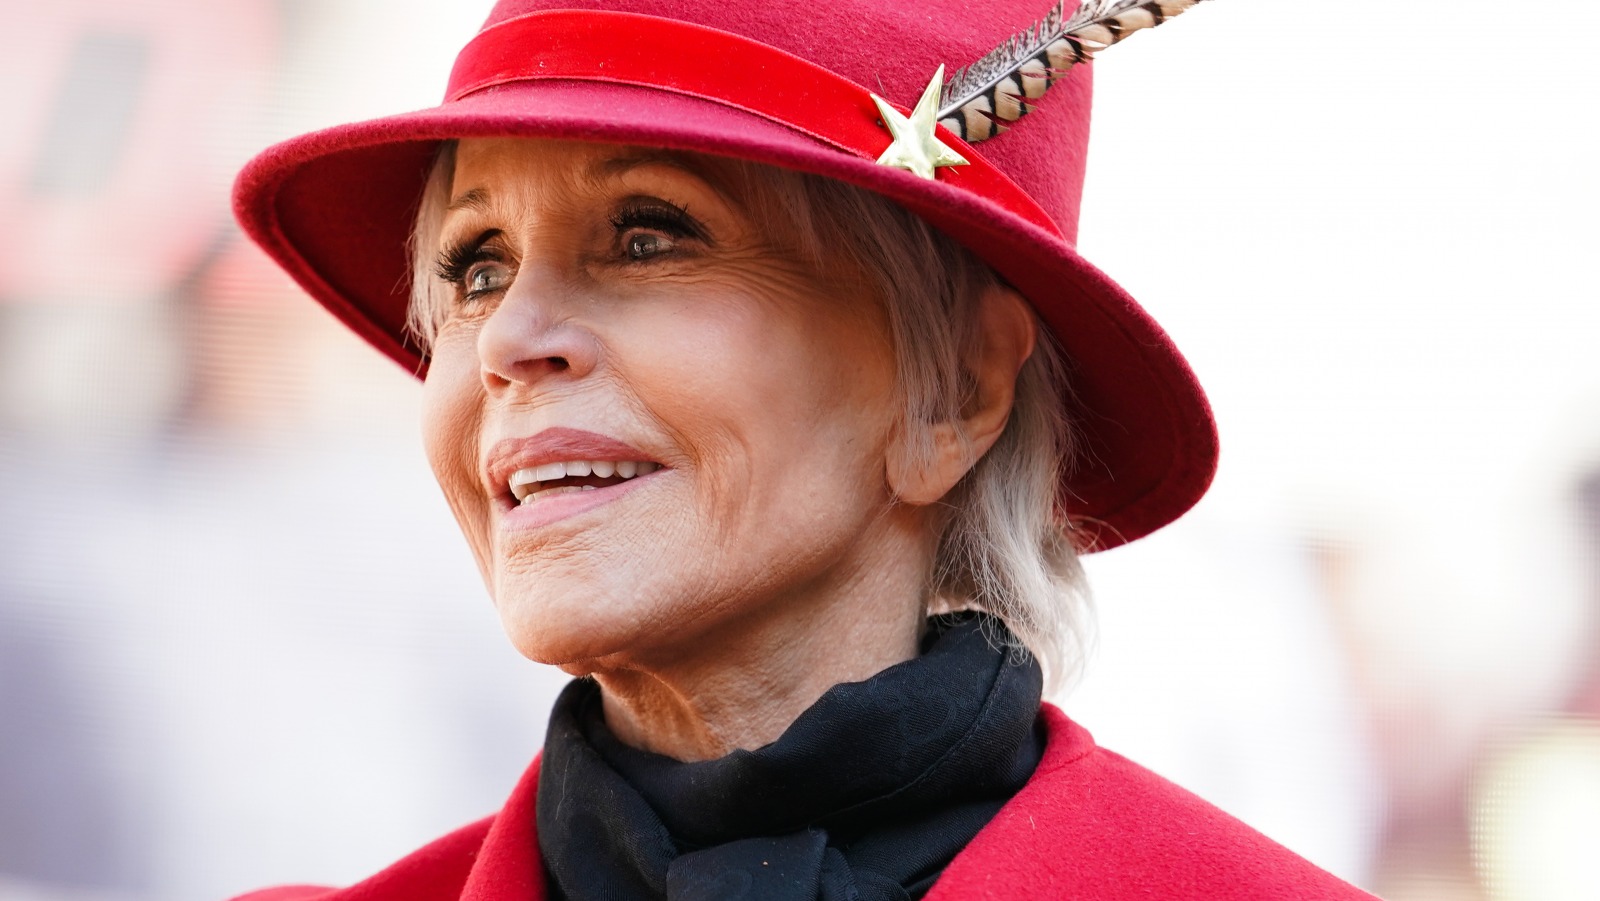 The Real Meaning Jane Fonda's Red Coat